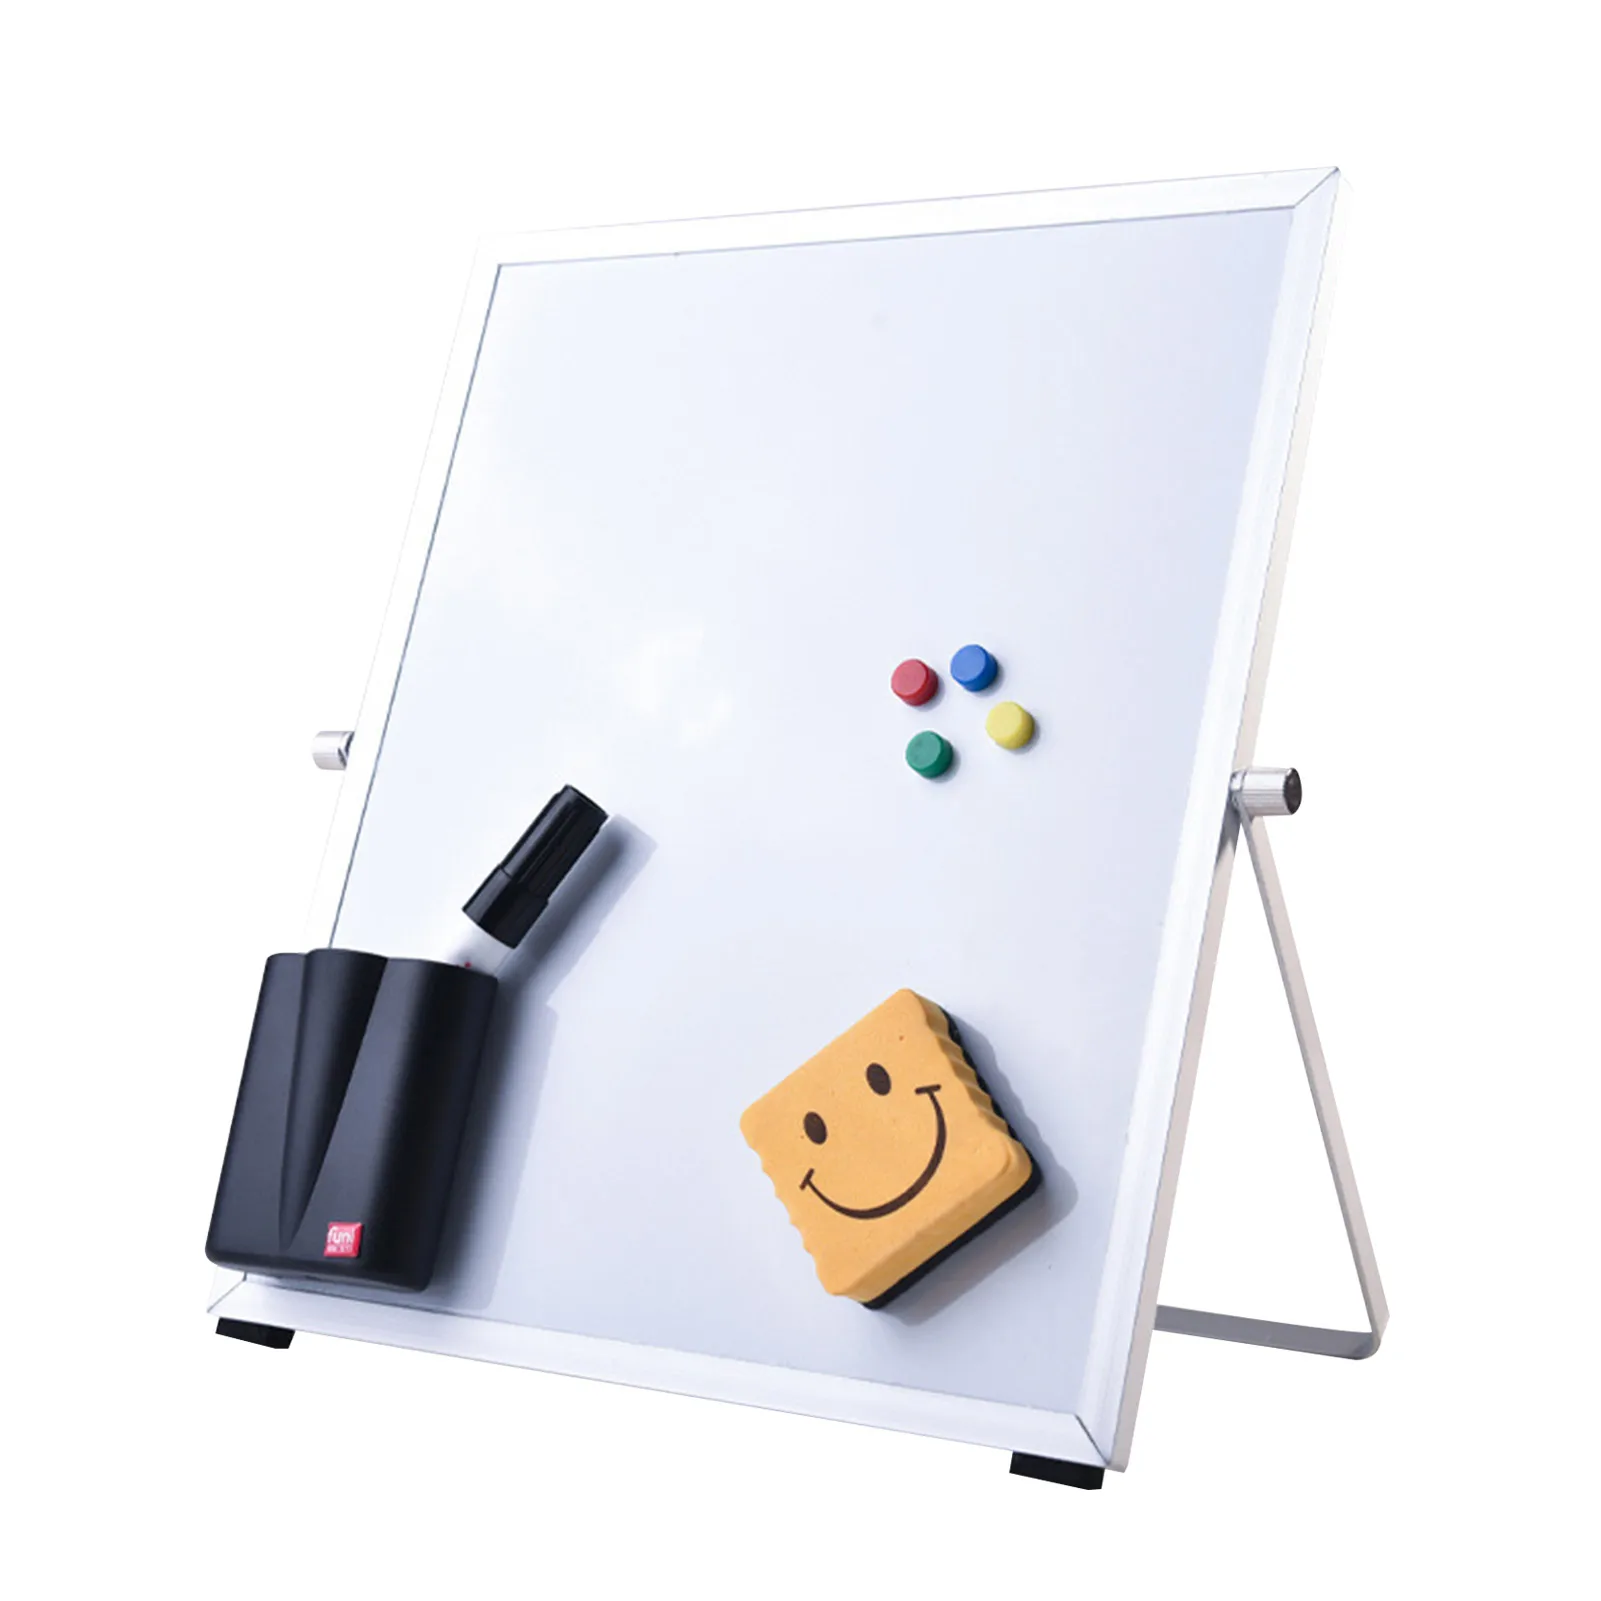 Magnetic Whiteboard Writing Board Double Side With Pen Eraser Magnetic Particles For Office School Desk Stand